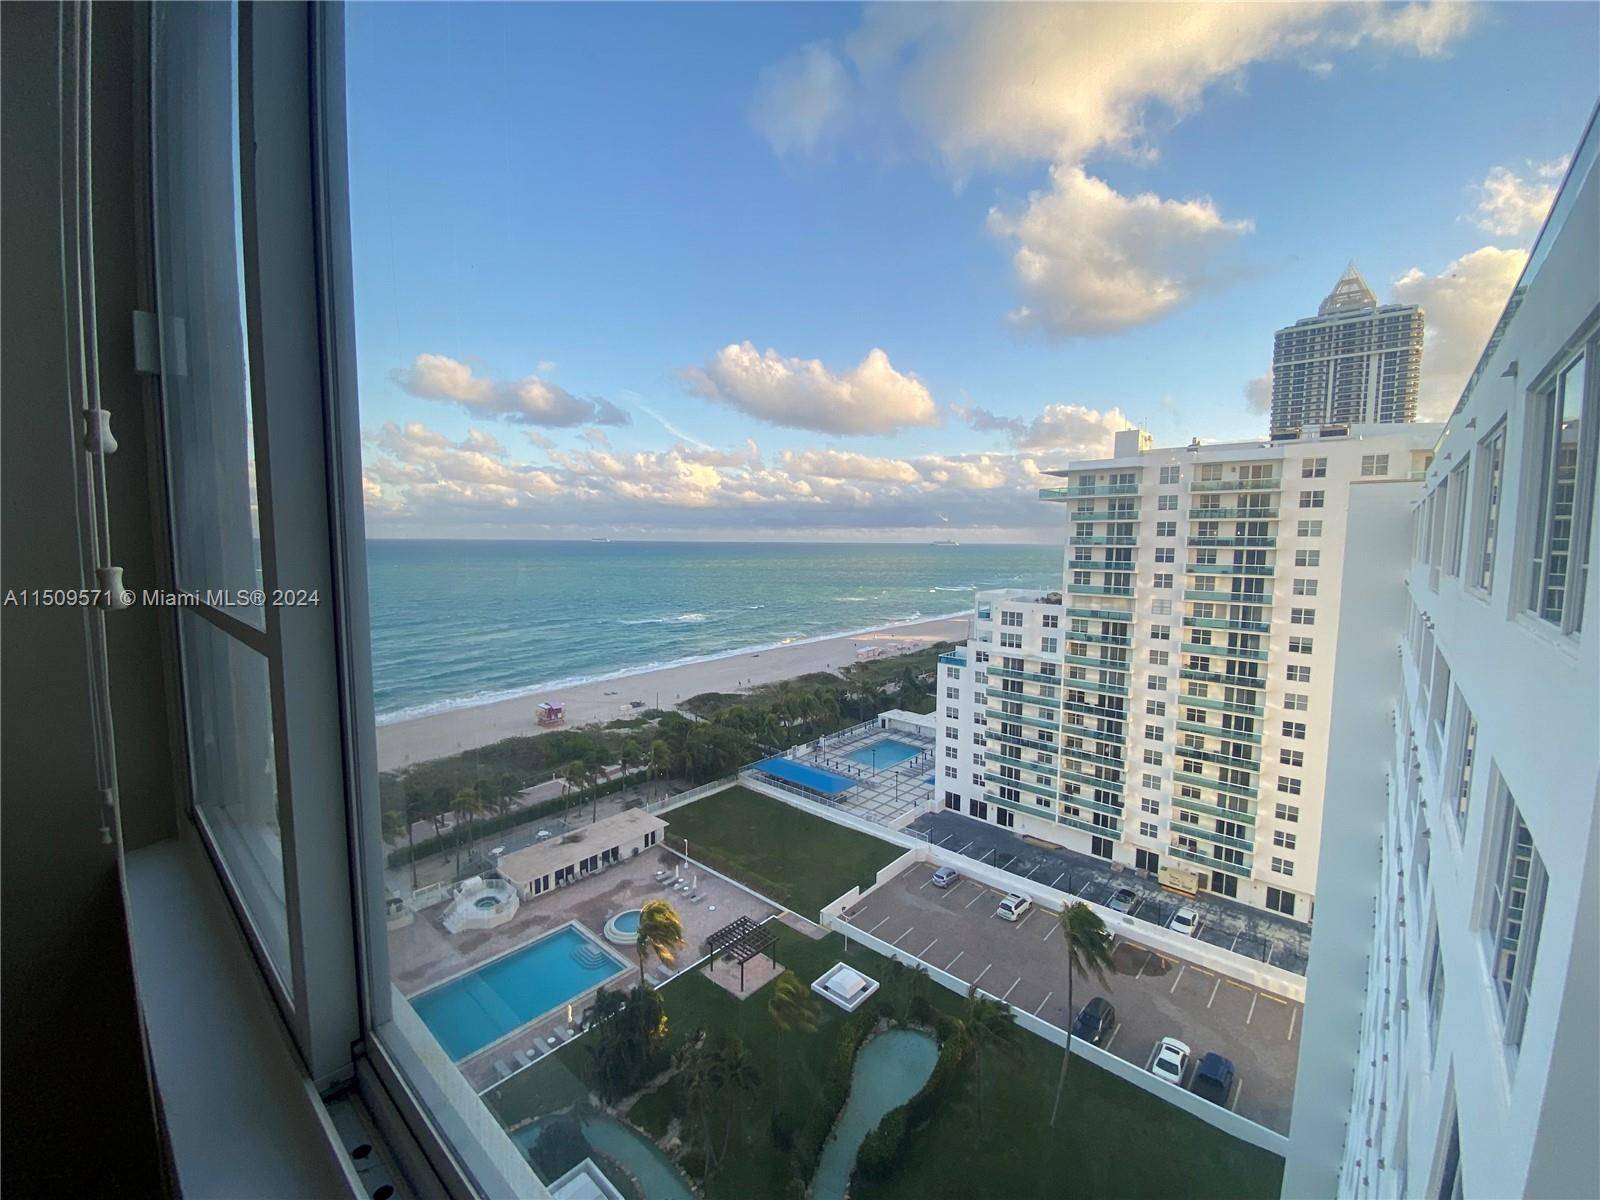 SPACIOUS OCEAN FRONT ONE BEDROOM CONDO WITH GORGEOUS OCEAN VIEWS IN THE HEART OF MIAMI BEACH.